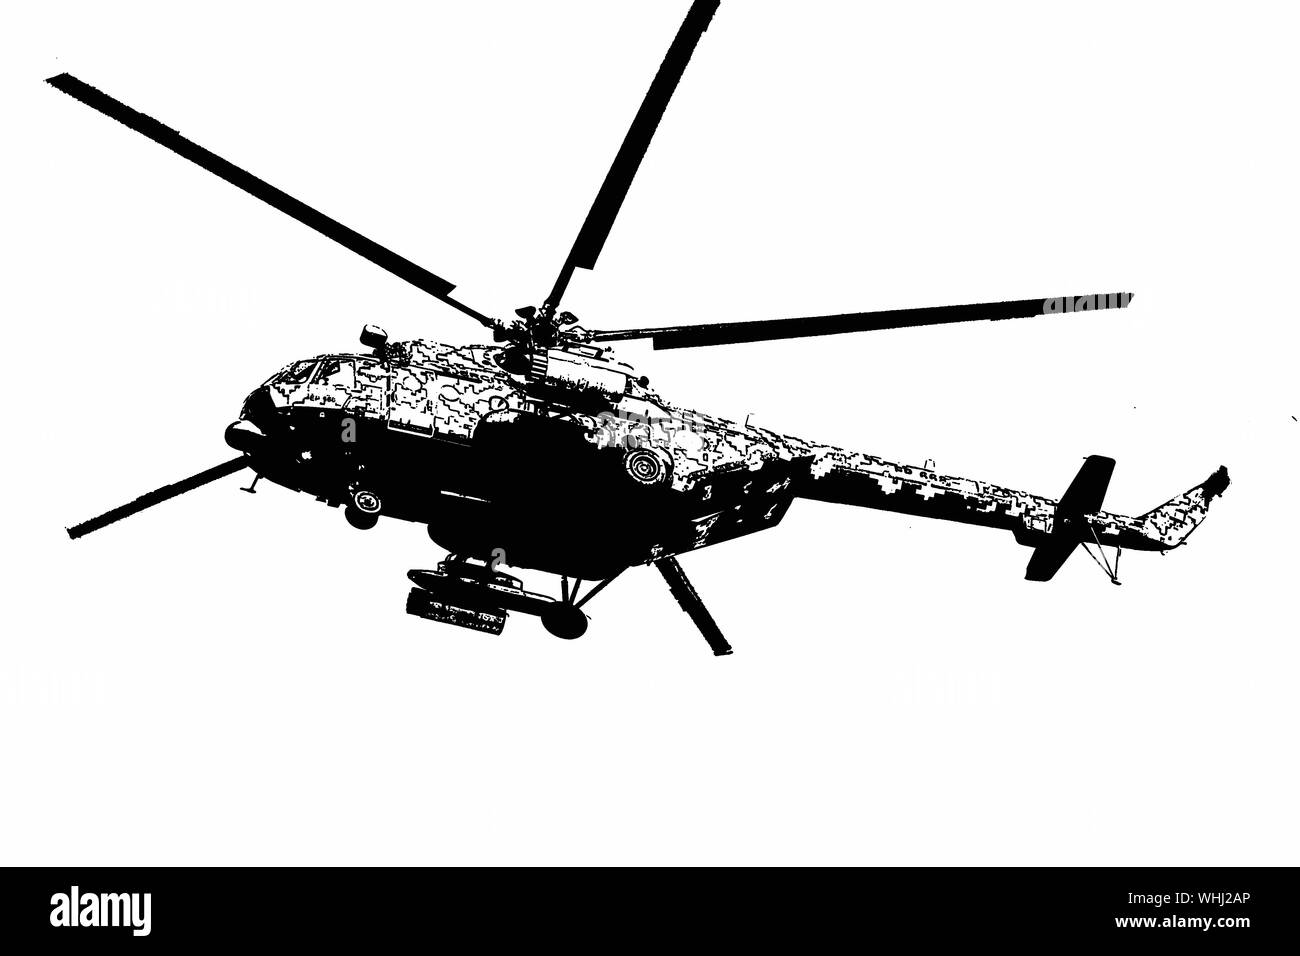 A Mil Mi-171Sh-P armed helicopter of the Peruvian Army Aviation Corps flying over the city of Lima when coming back from a mission Stock Photo